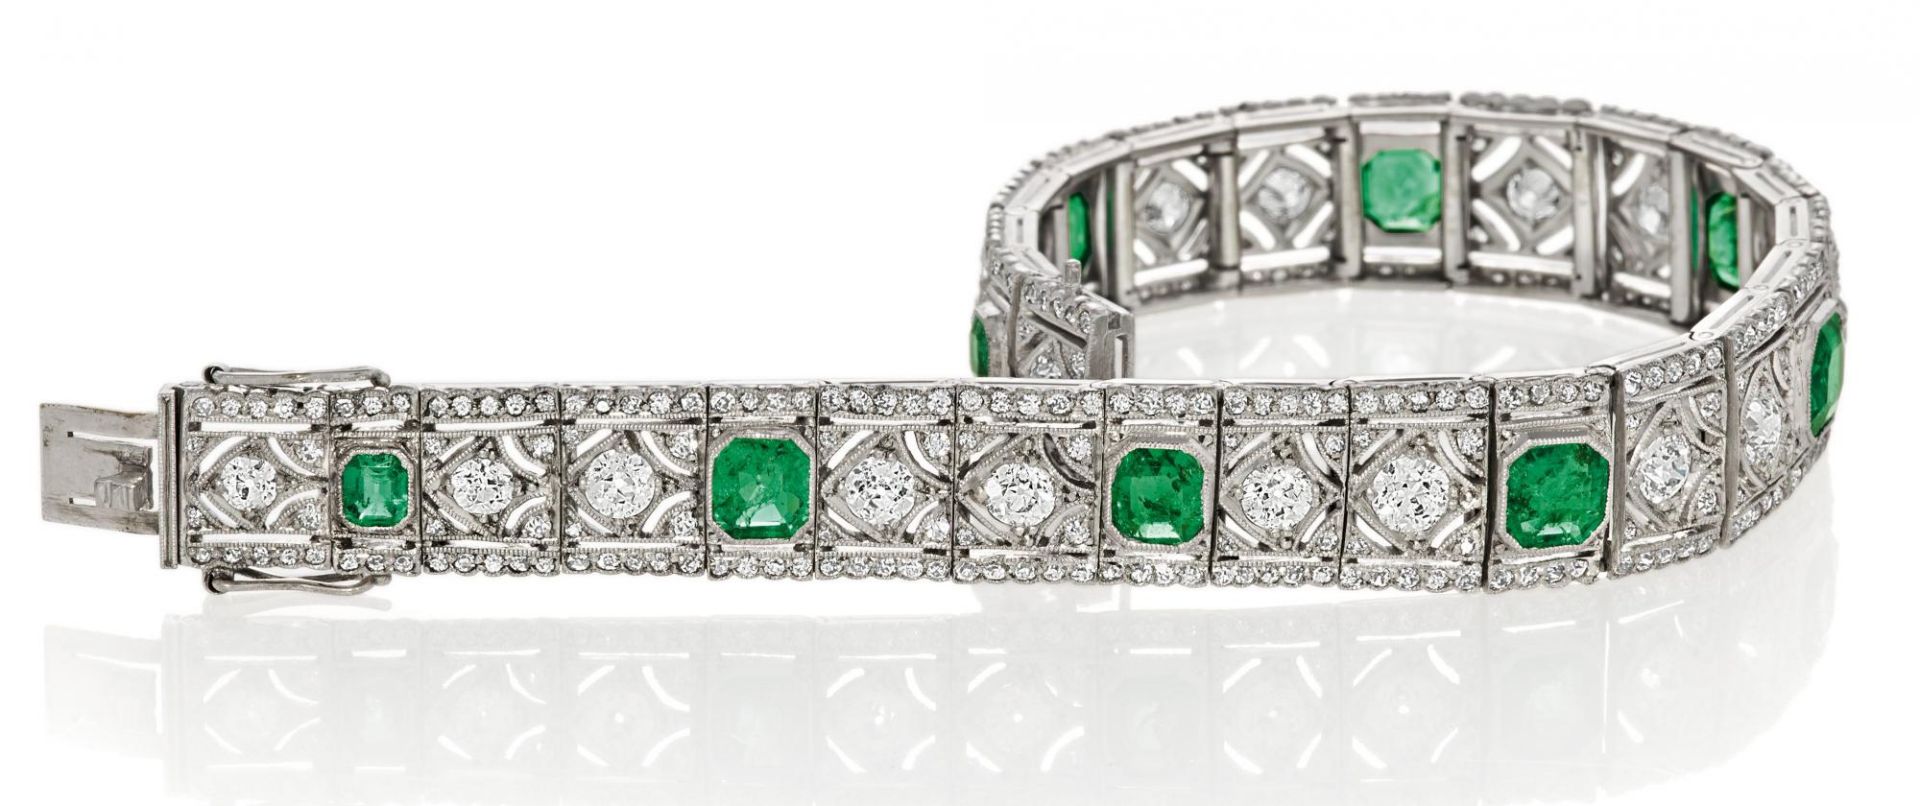 EMERALD-DIAMOND-BRACELET. Date: Art Deco style. Material: 750/- white gold, tested. Total Weight: